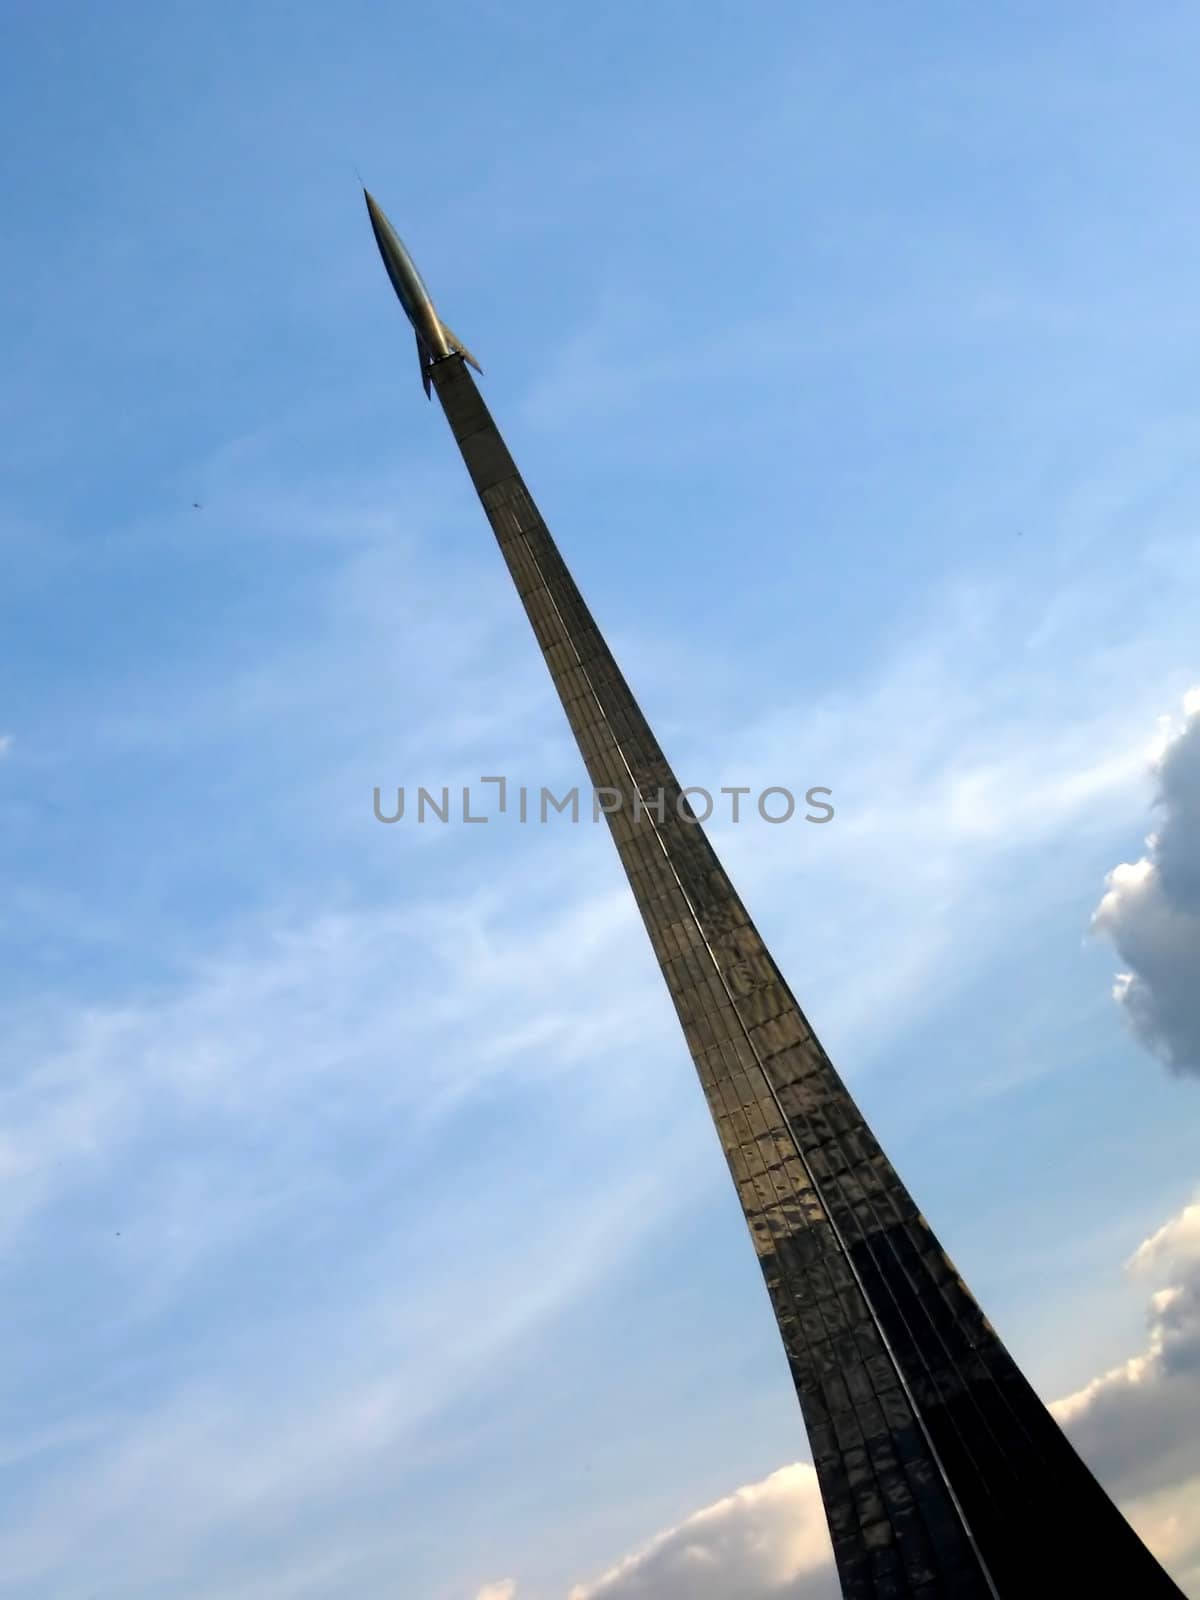 Inclined rocket monument at Moscow museum of cosmos